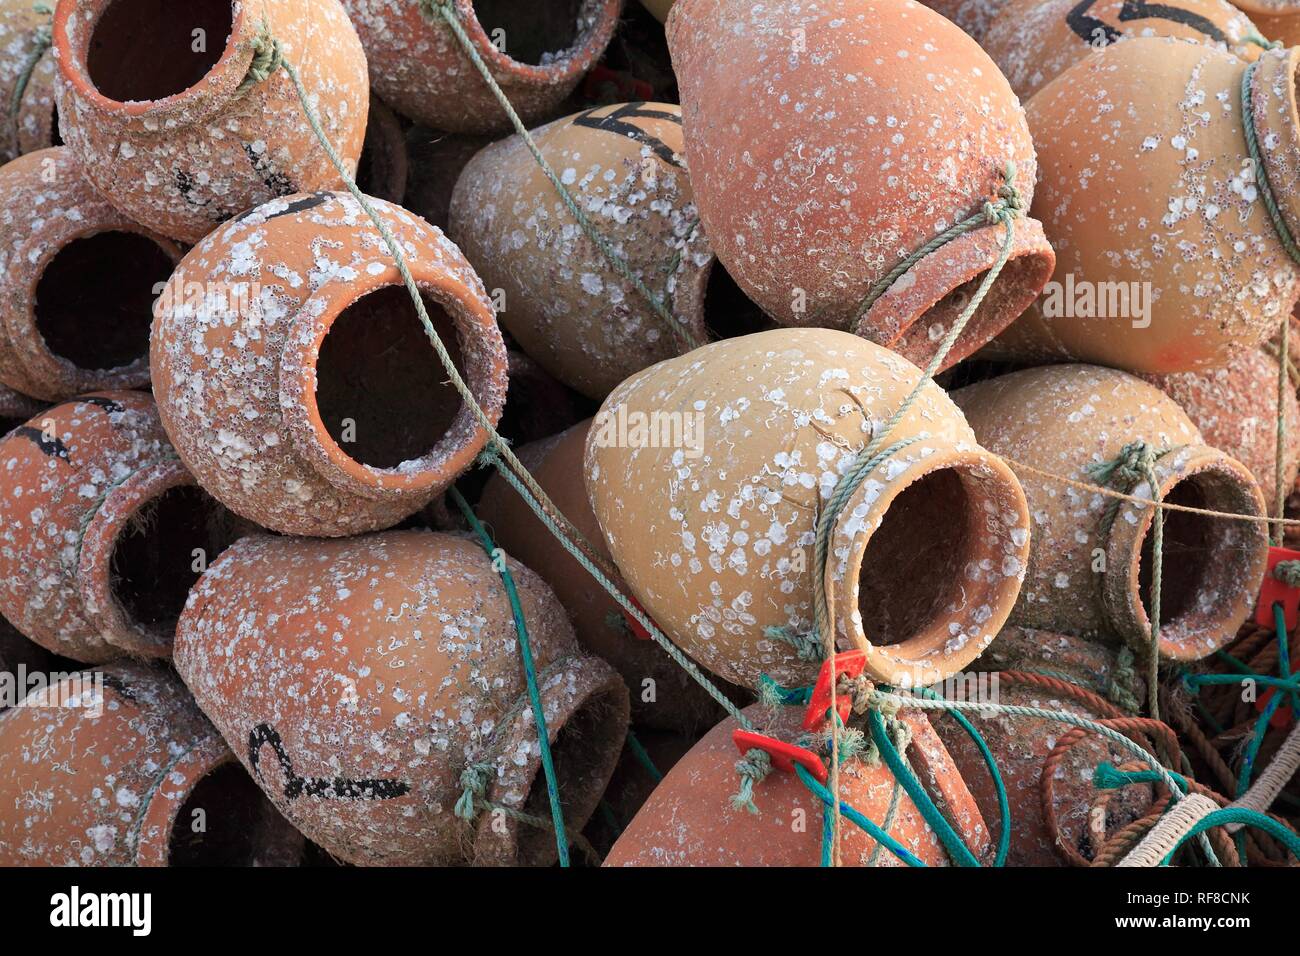 Clay pots for catching rock lobsters in Armacao de Pera, Algarve, Portugal Stock Photo